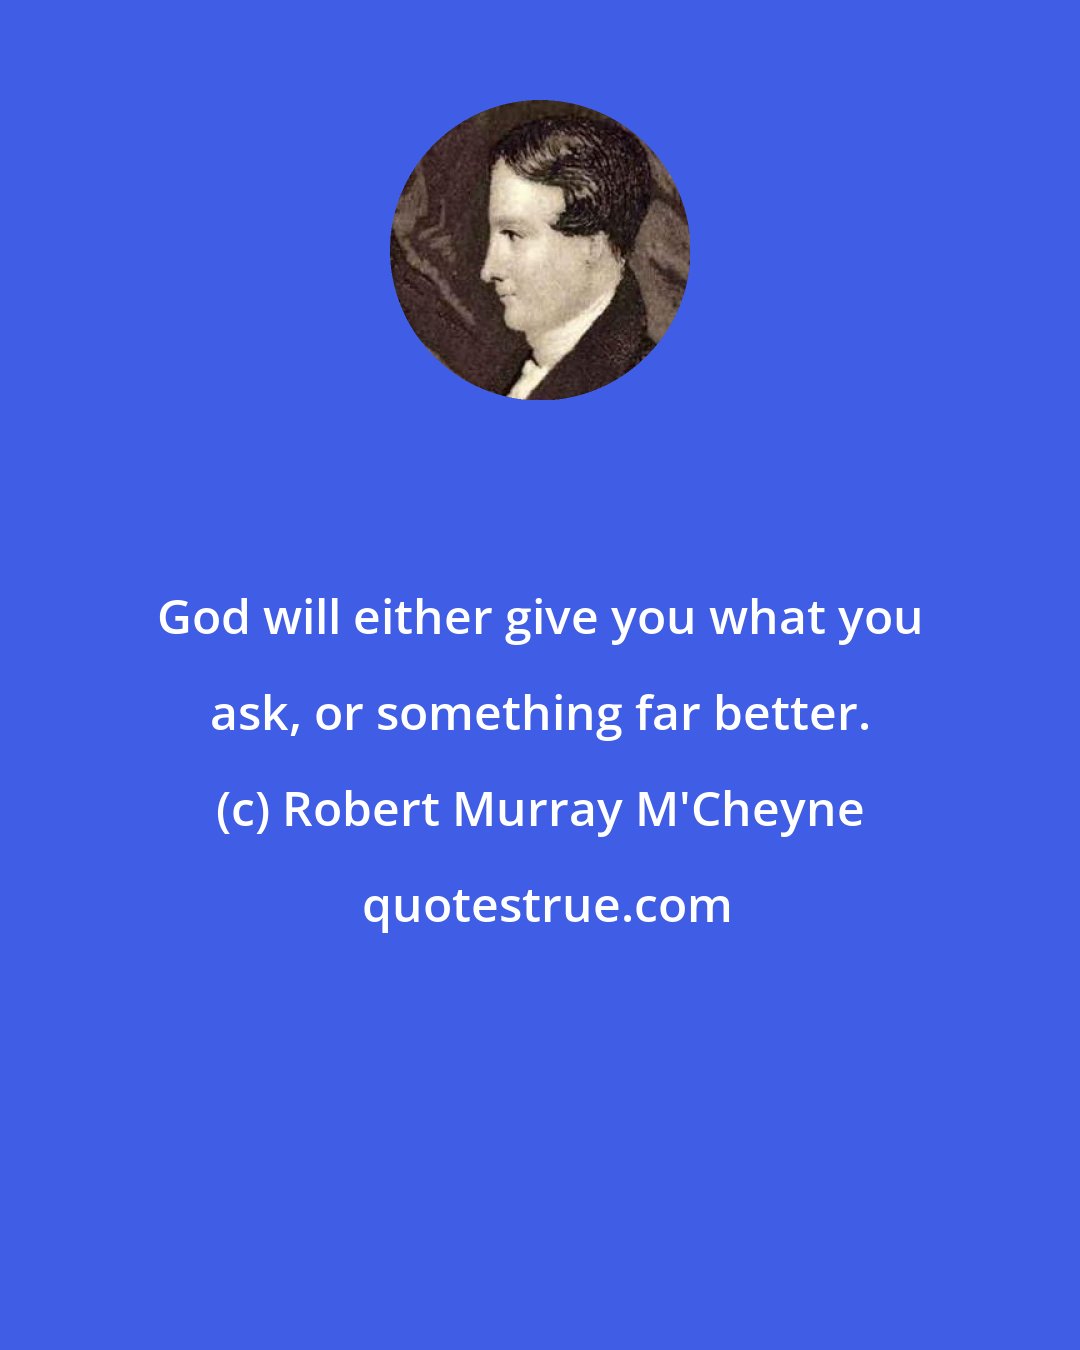 Robert Murray M'Cheyne: God will either give you what you ask, or something far better.